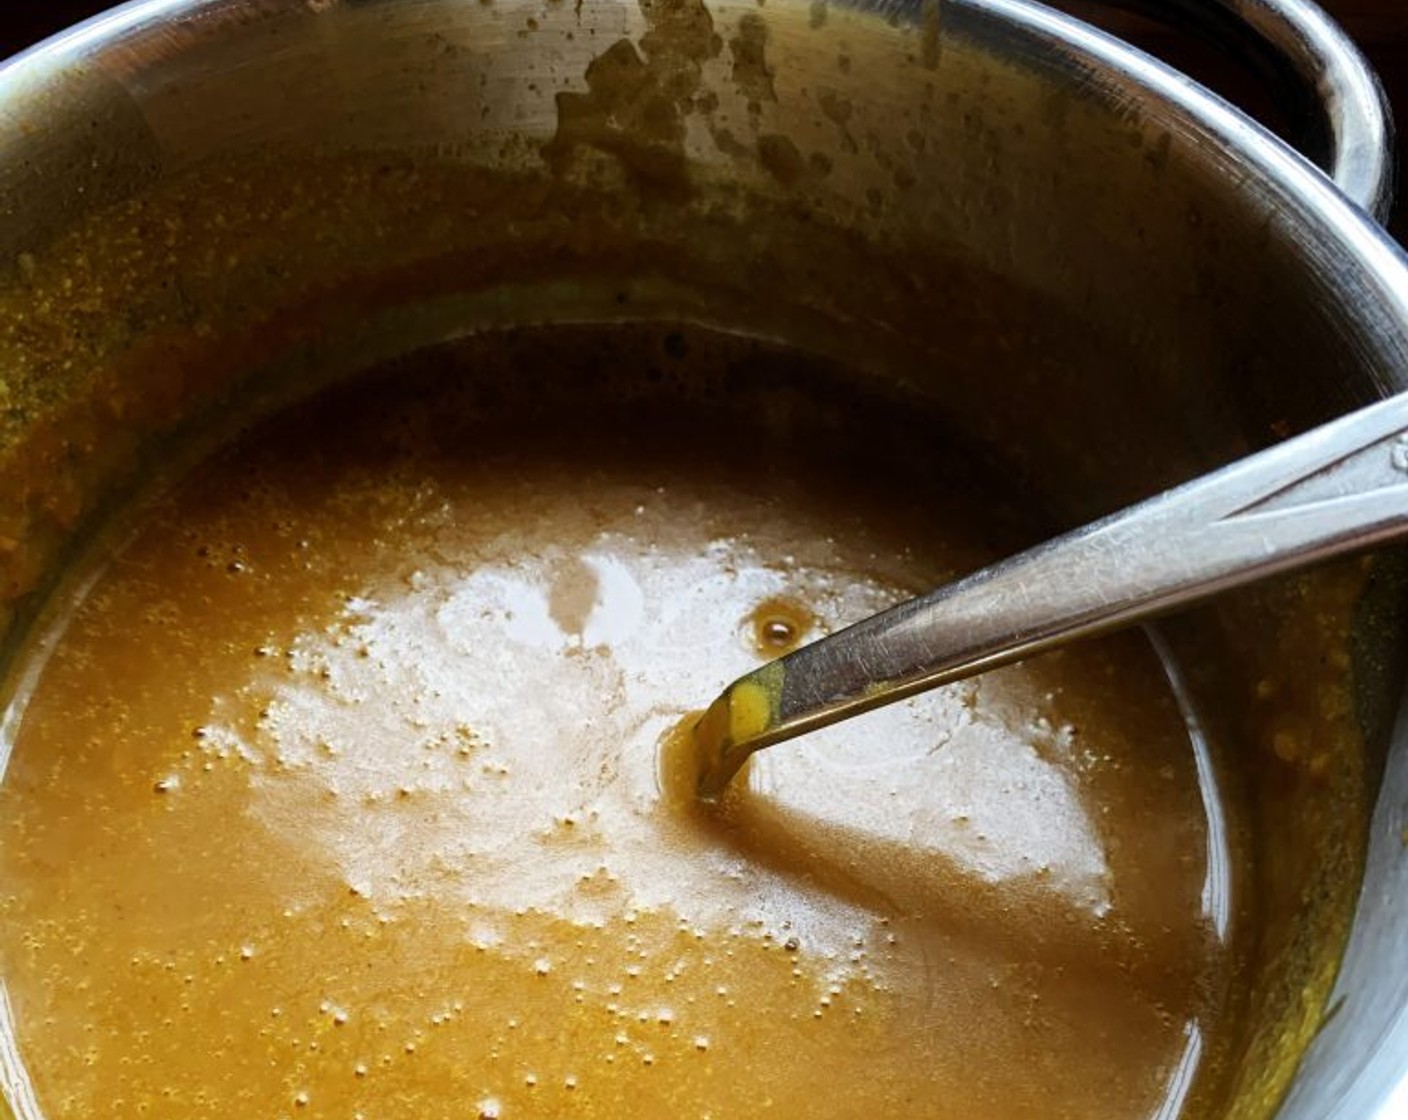 step 2 In a saucepan combine the Full-Fat Coconut Milk (1/2 can), Water (1/2 cup), Pumpkin Purée (1/2 cup), Curry Paste (1 1/2 Tbsp), Soy Sauce (1 1/2 Tbsp), and Fresh Ginger (1/2 Tbsp). Bring to a simmer and let it cook for 10 minutes.